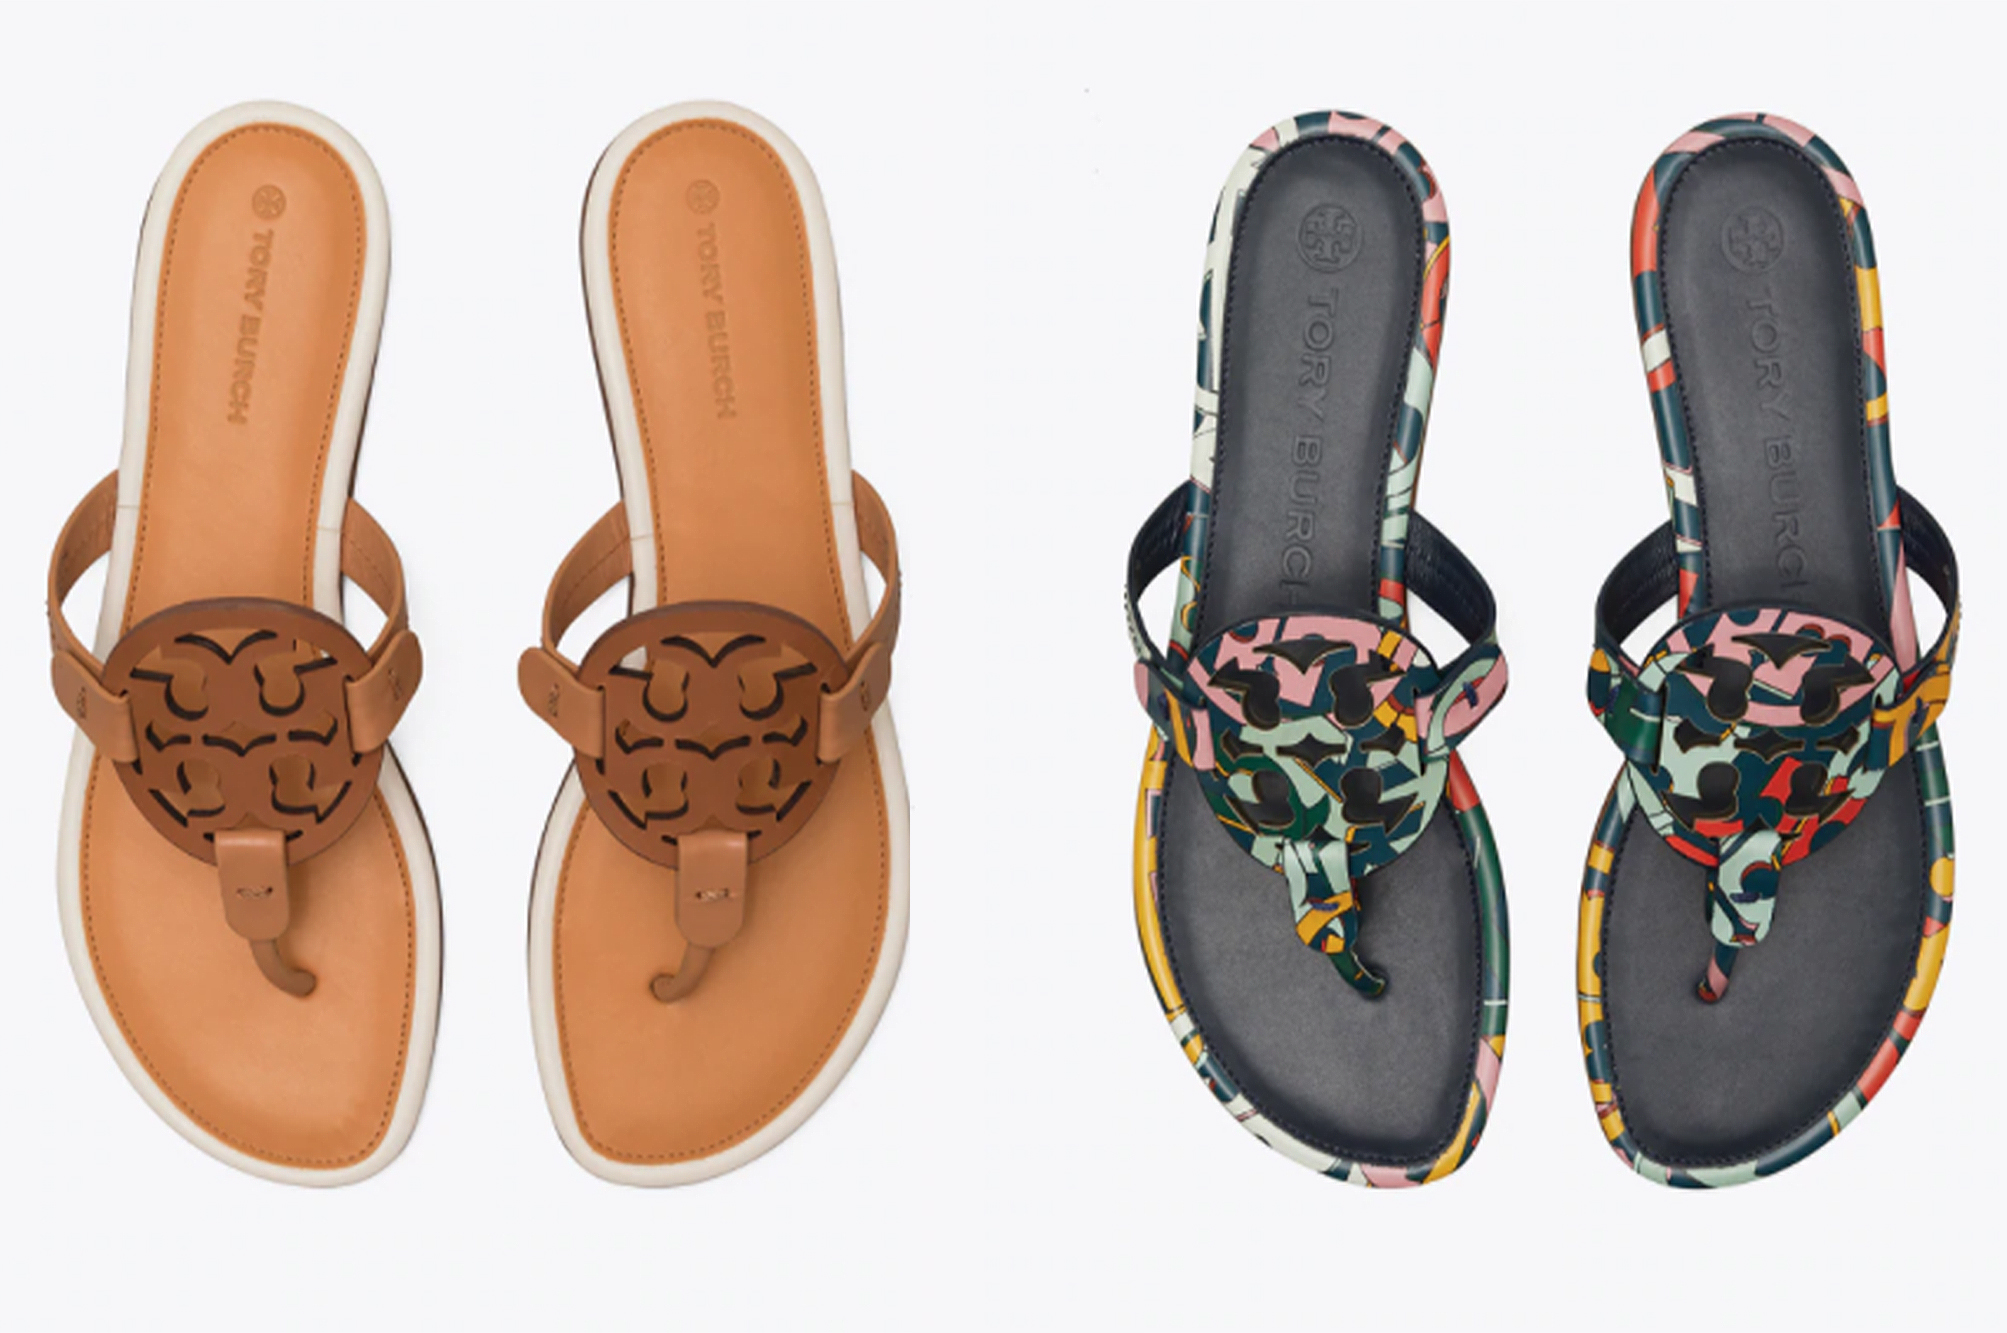 Tory Burch Fall Event: Get $100+ off 2 Pairs of Miller Sandals